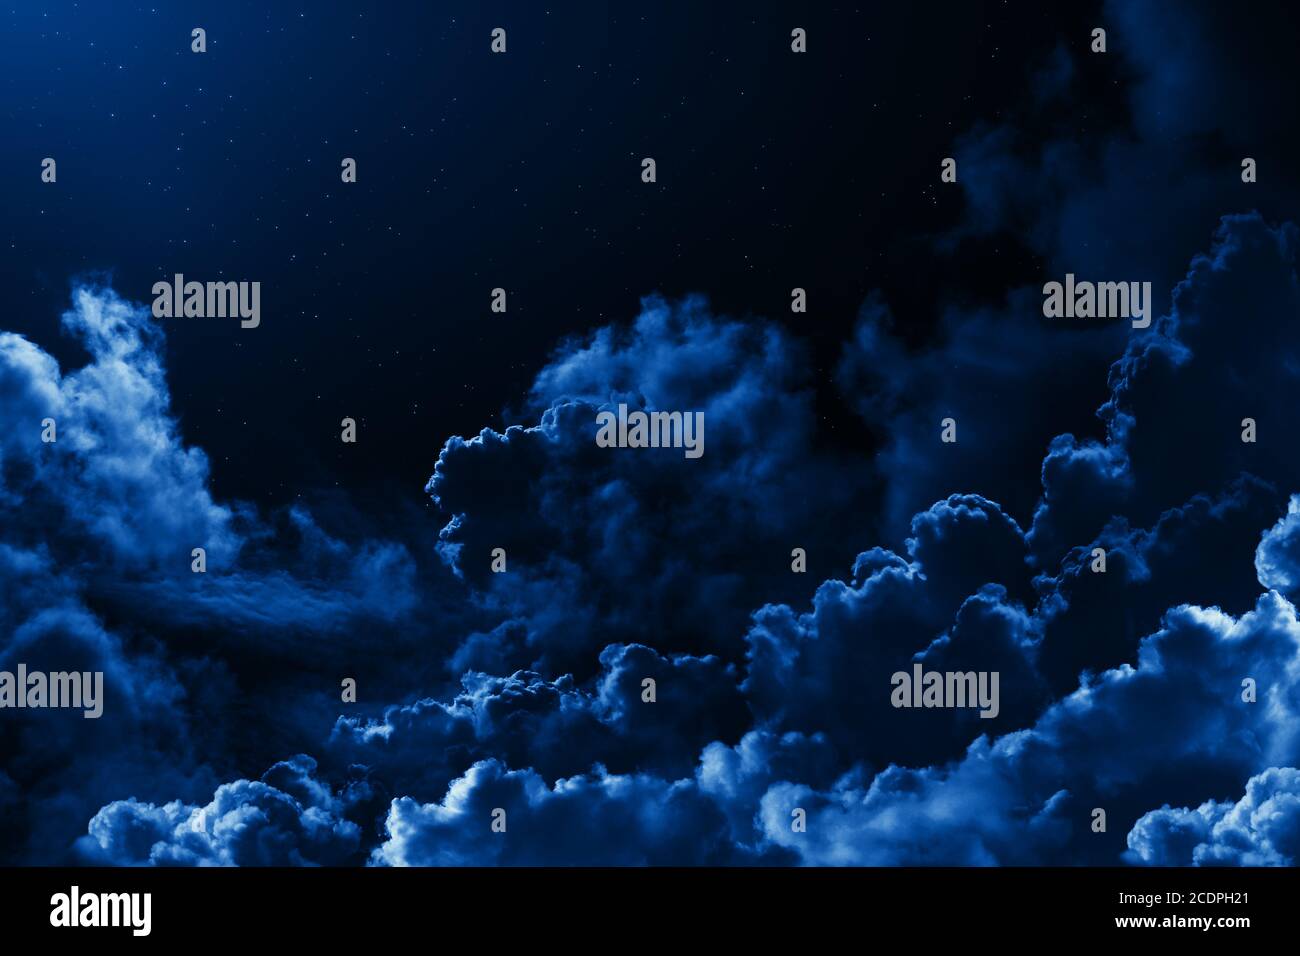 Mystical Midnight Sky With Stars Surrounded By Dramatic Clouds Dark Natural Background With Night Starry Cloudy Sky Moonlit Clouds Stock Photo Alamy